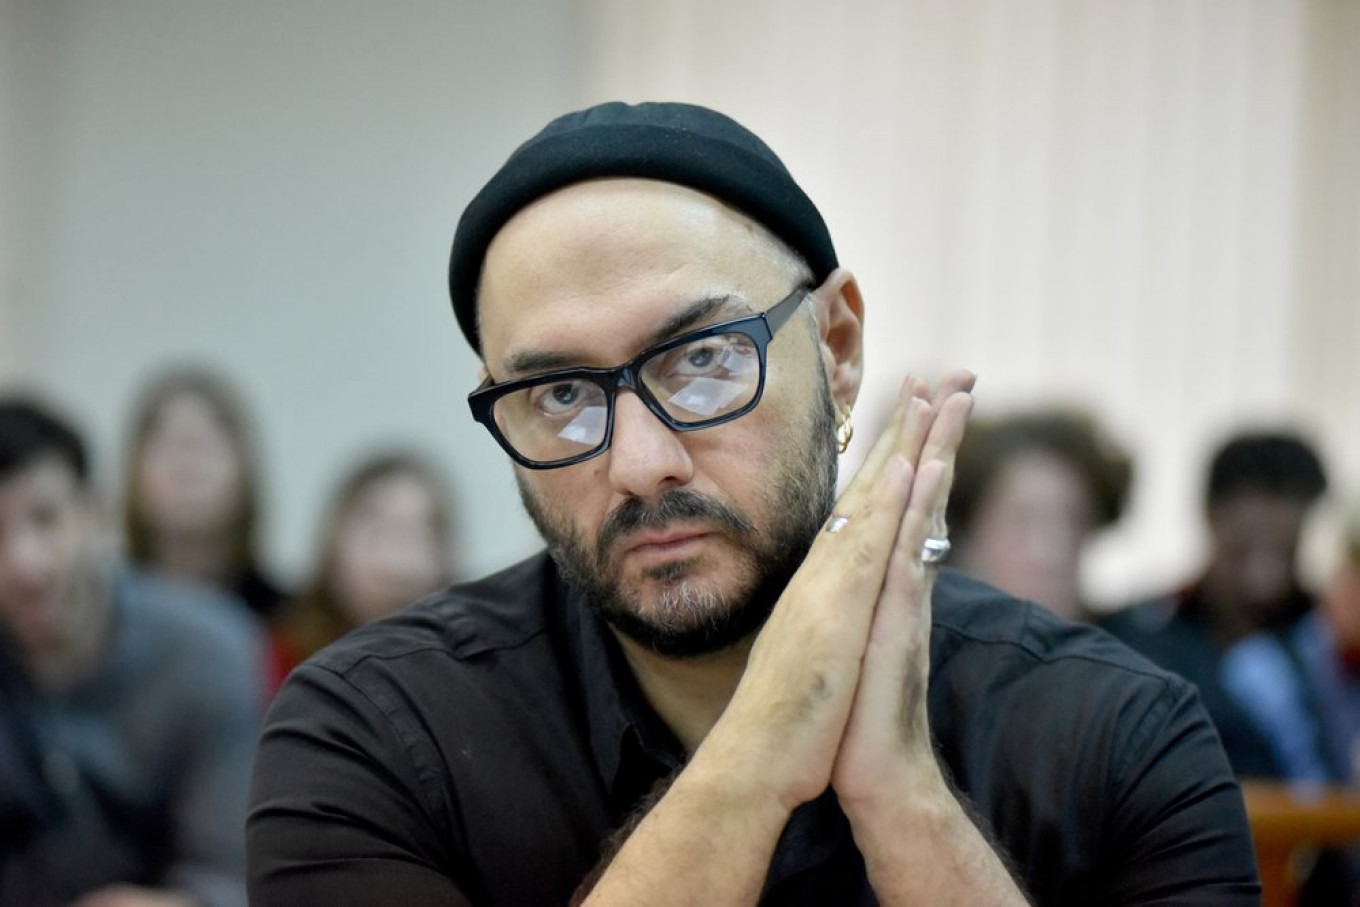 Russian Director Serebrennikov Released on Bail After 1.5 Years of House Arrest